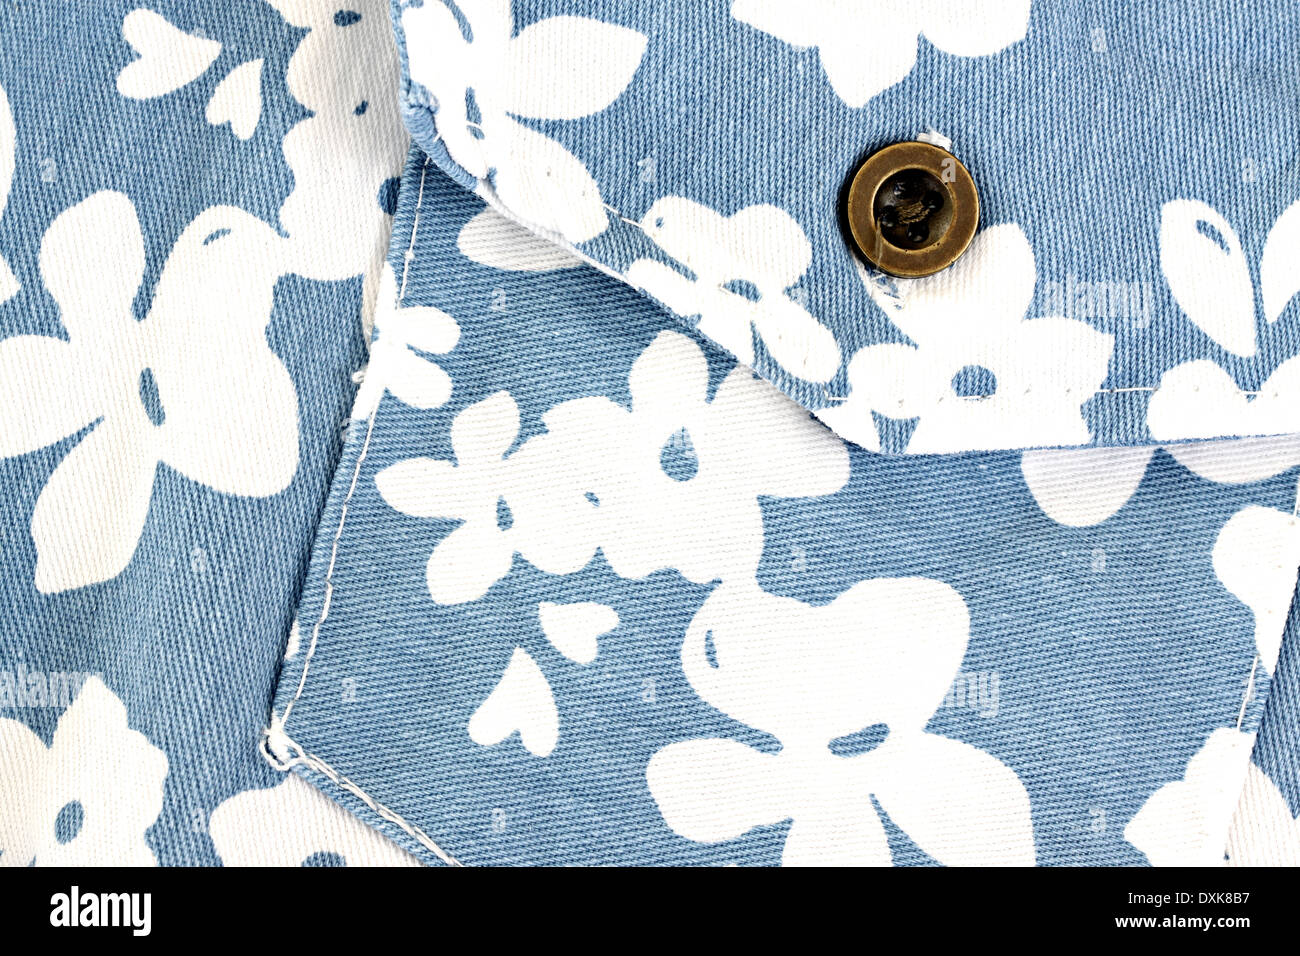 White flower pattern on blue fabric pocket for the background. Stock Photo